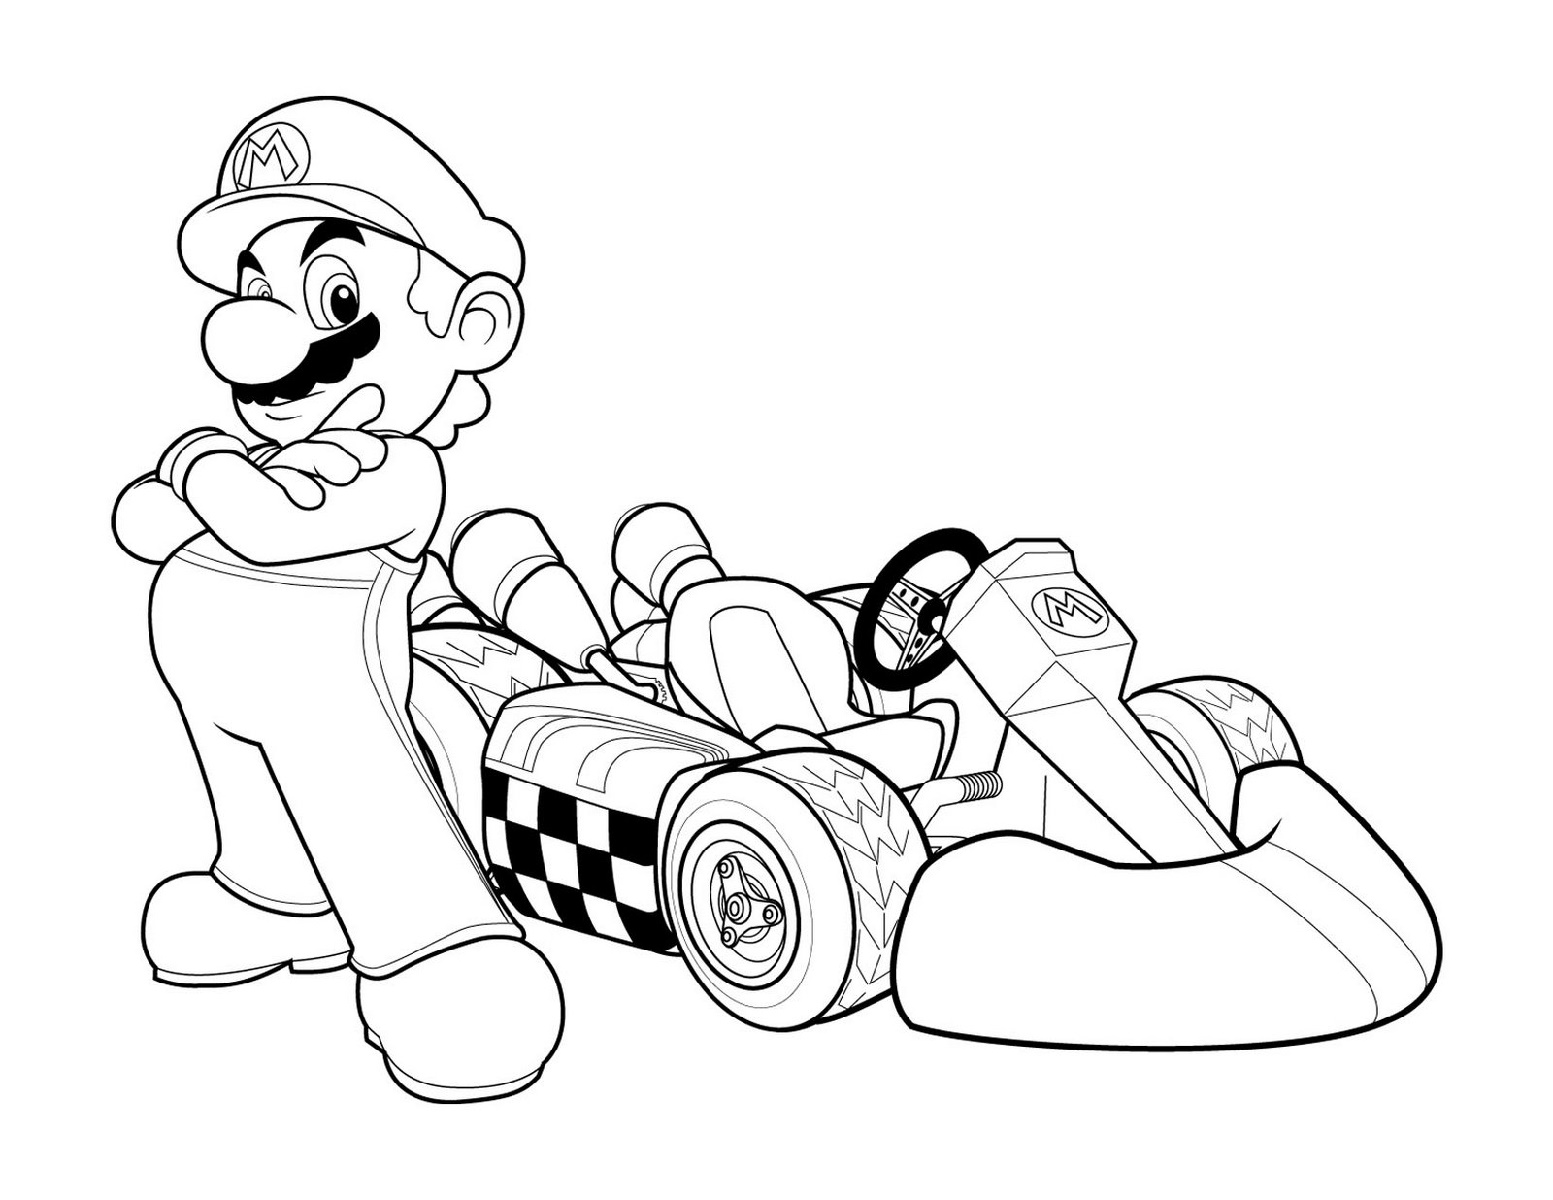 Mario-Coloring-Pages-Printable